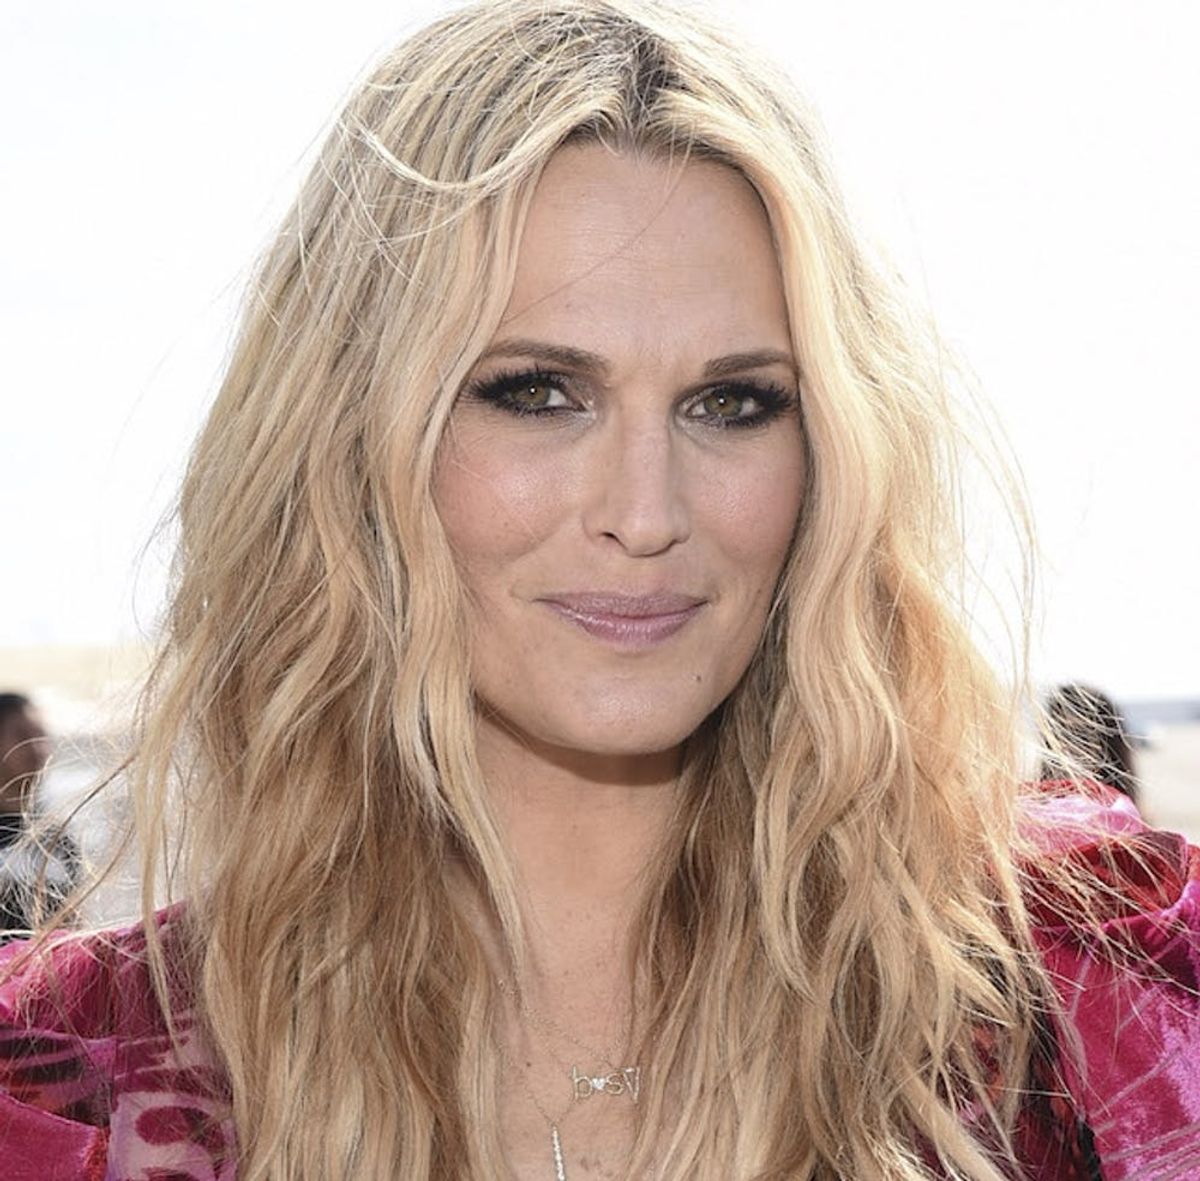 Why Molly Sims and Other Moms Are Posting This on Instagram